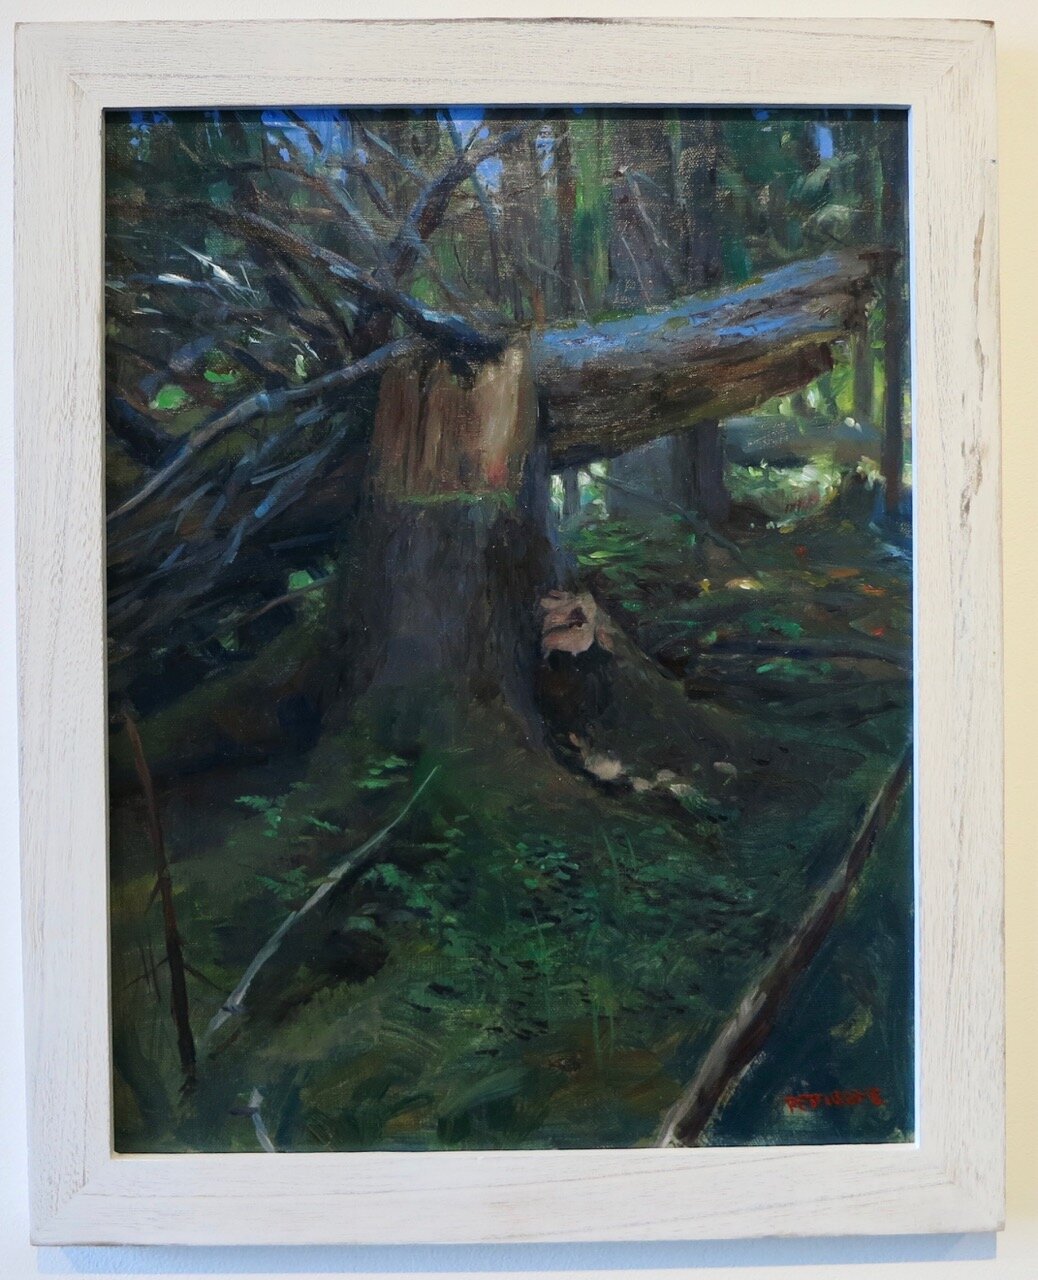    Study of a Broken Tree , 2020   Oil on canvas  18x14 inches 